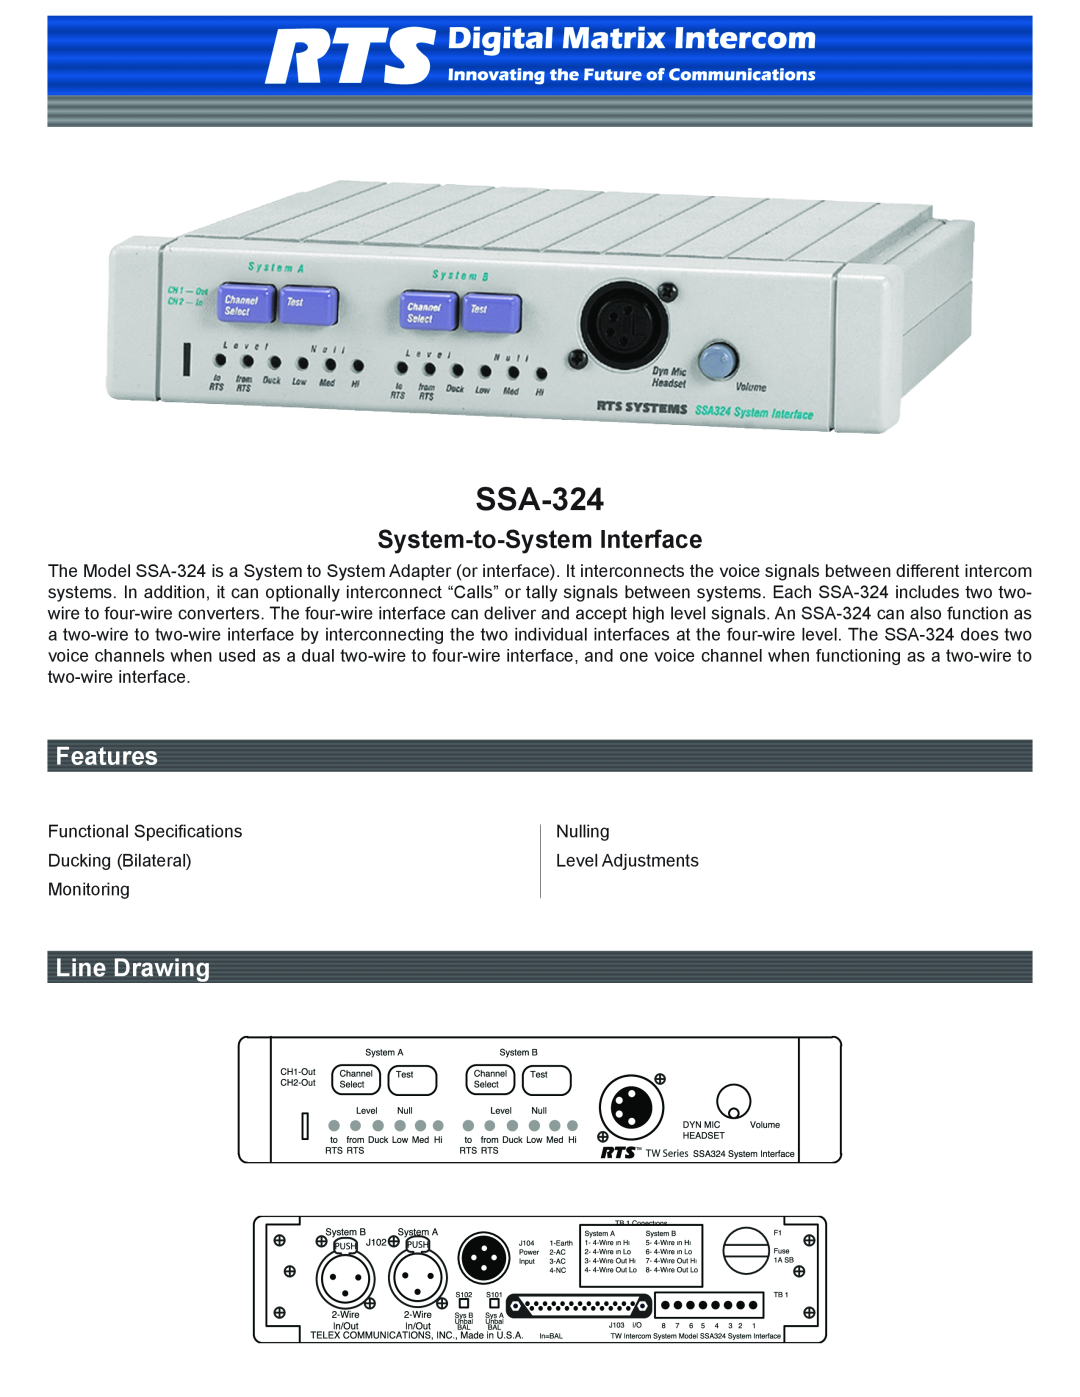 RTS SSA-324 manual System-to-System Interface, Features, Line Drawing 